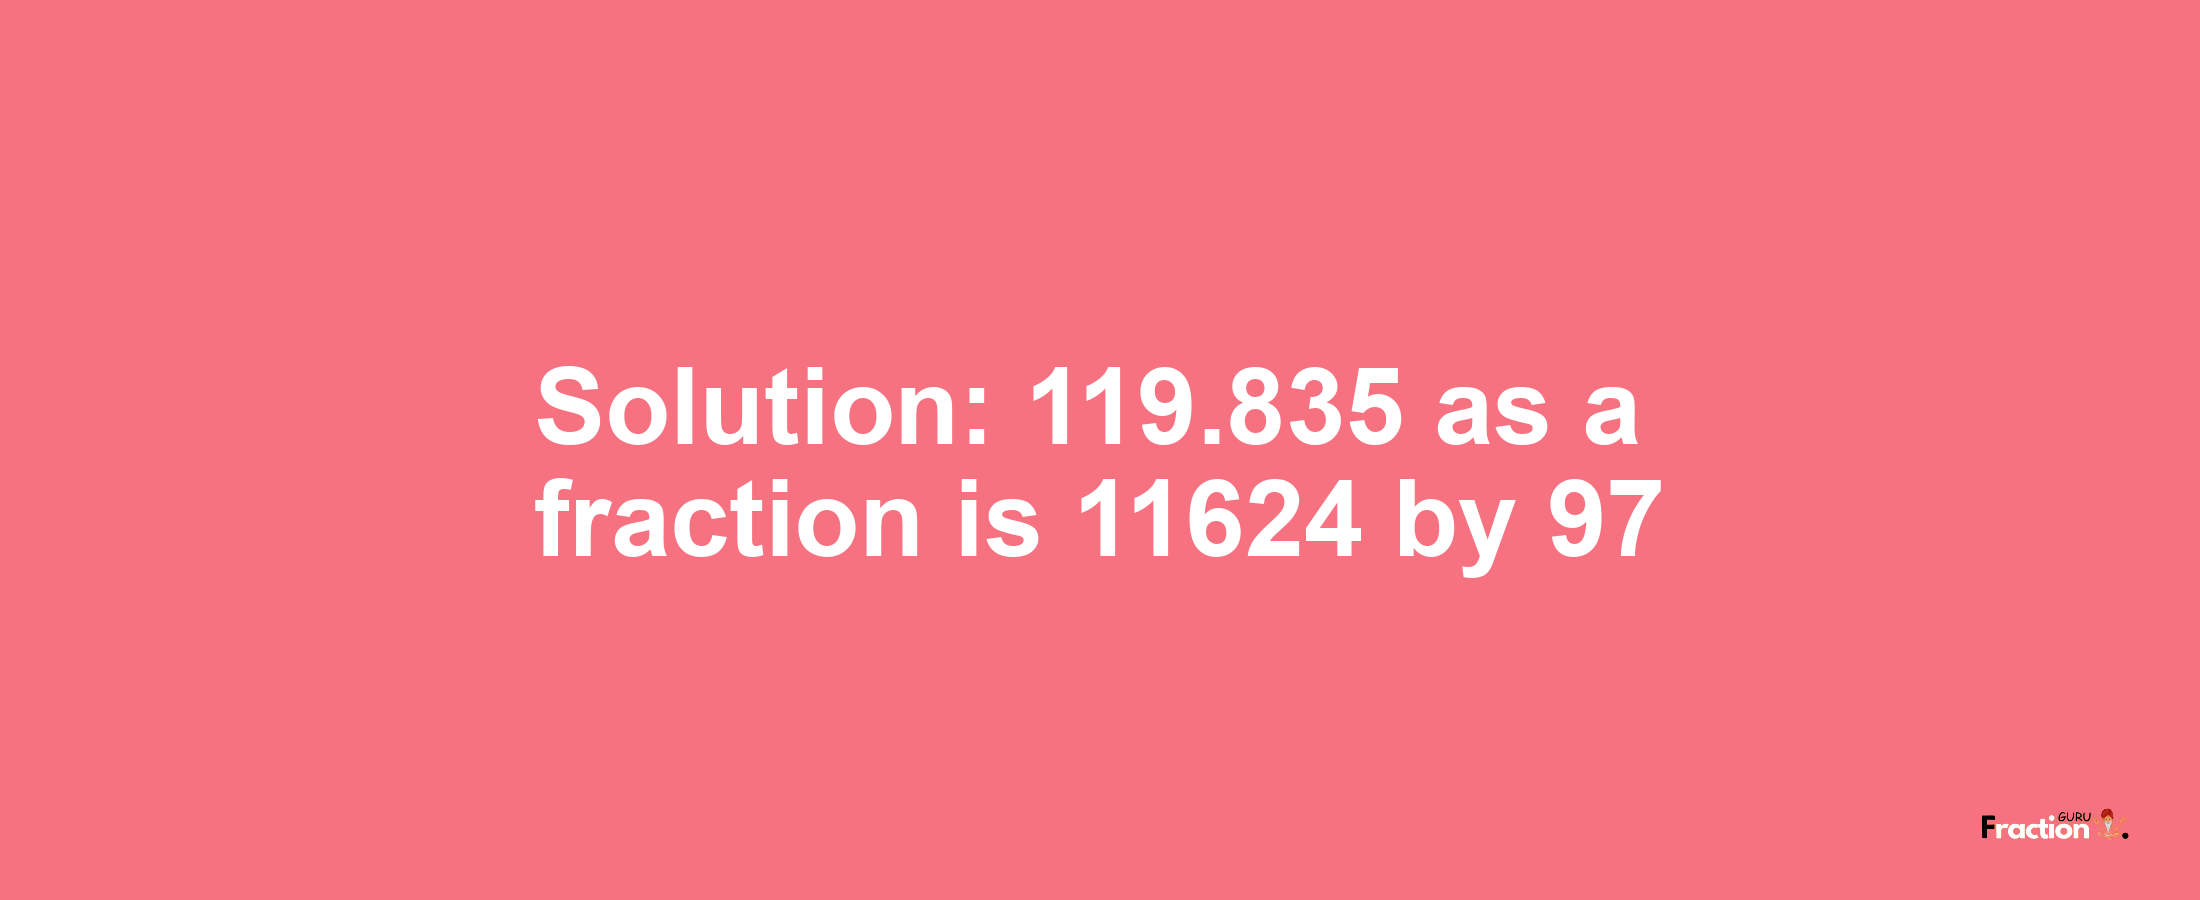 Solution:119.835 as a fraction is 11624/97